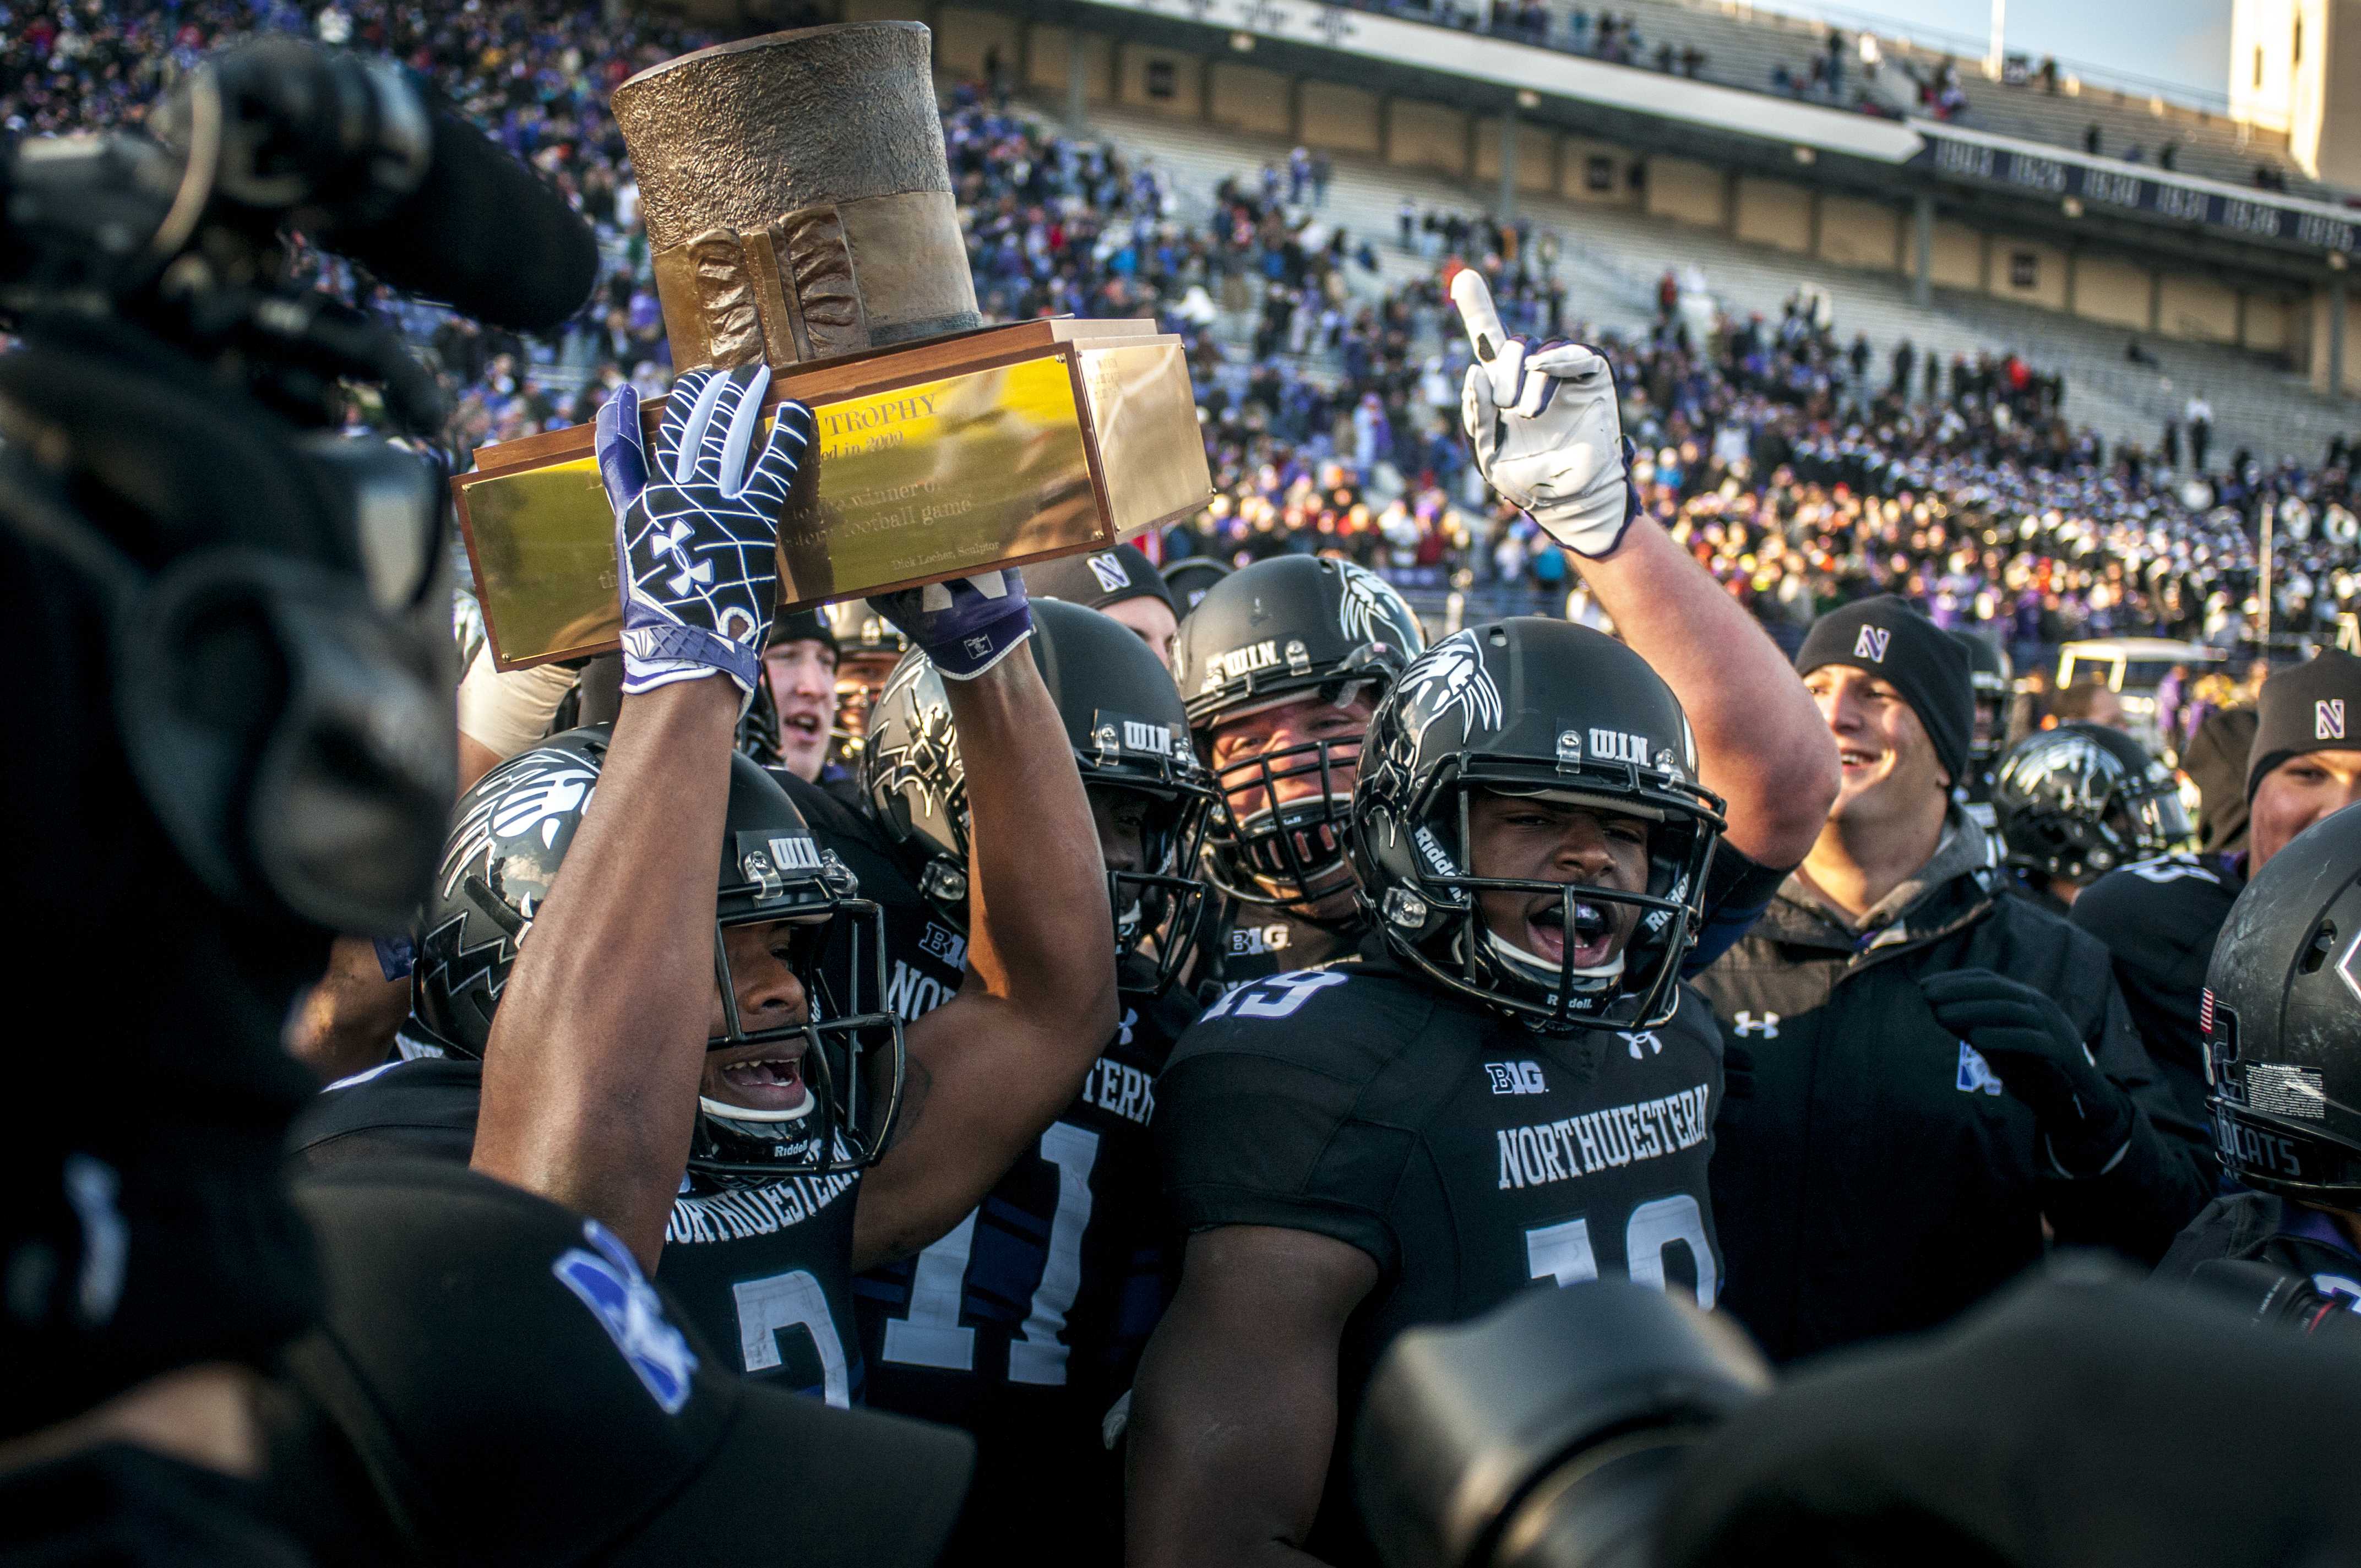 Northwestern Wildcats hoist the Land of Lincoln Trophy after defeating Illinois 50-14 on Saturday at Ryan Field.